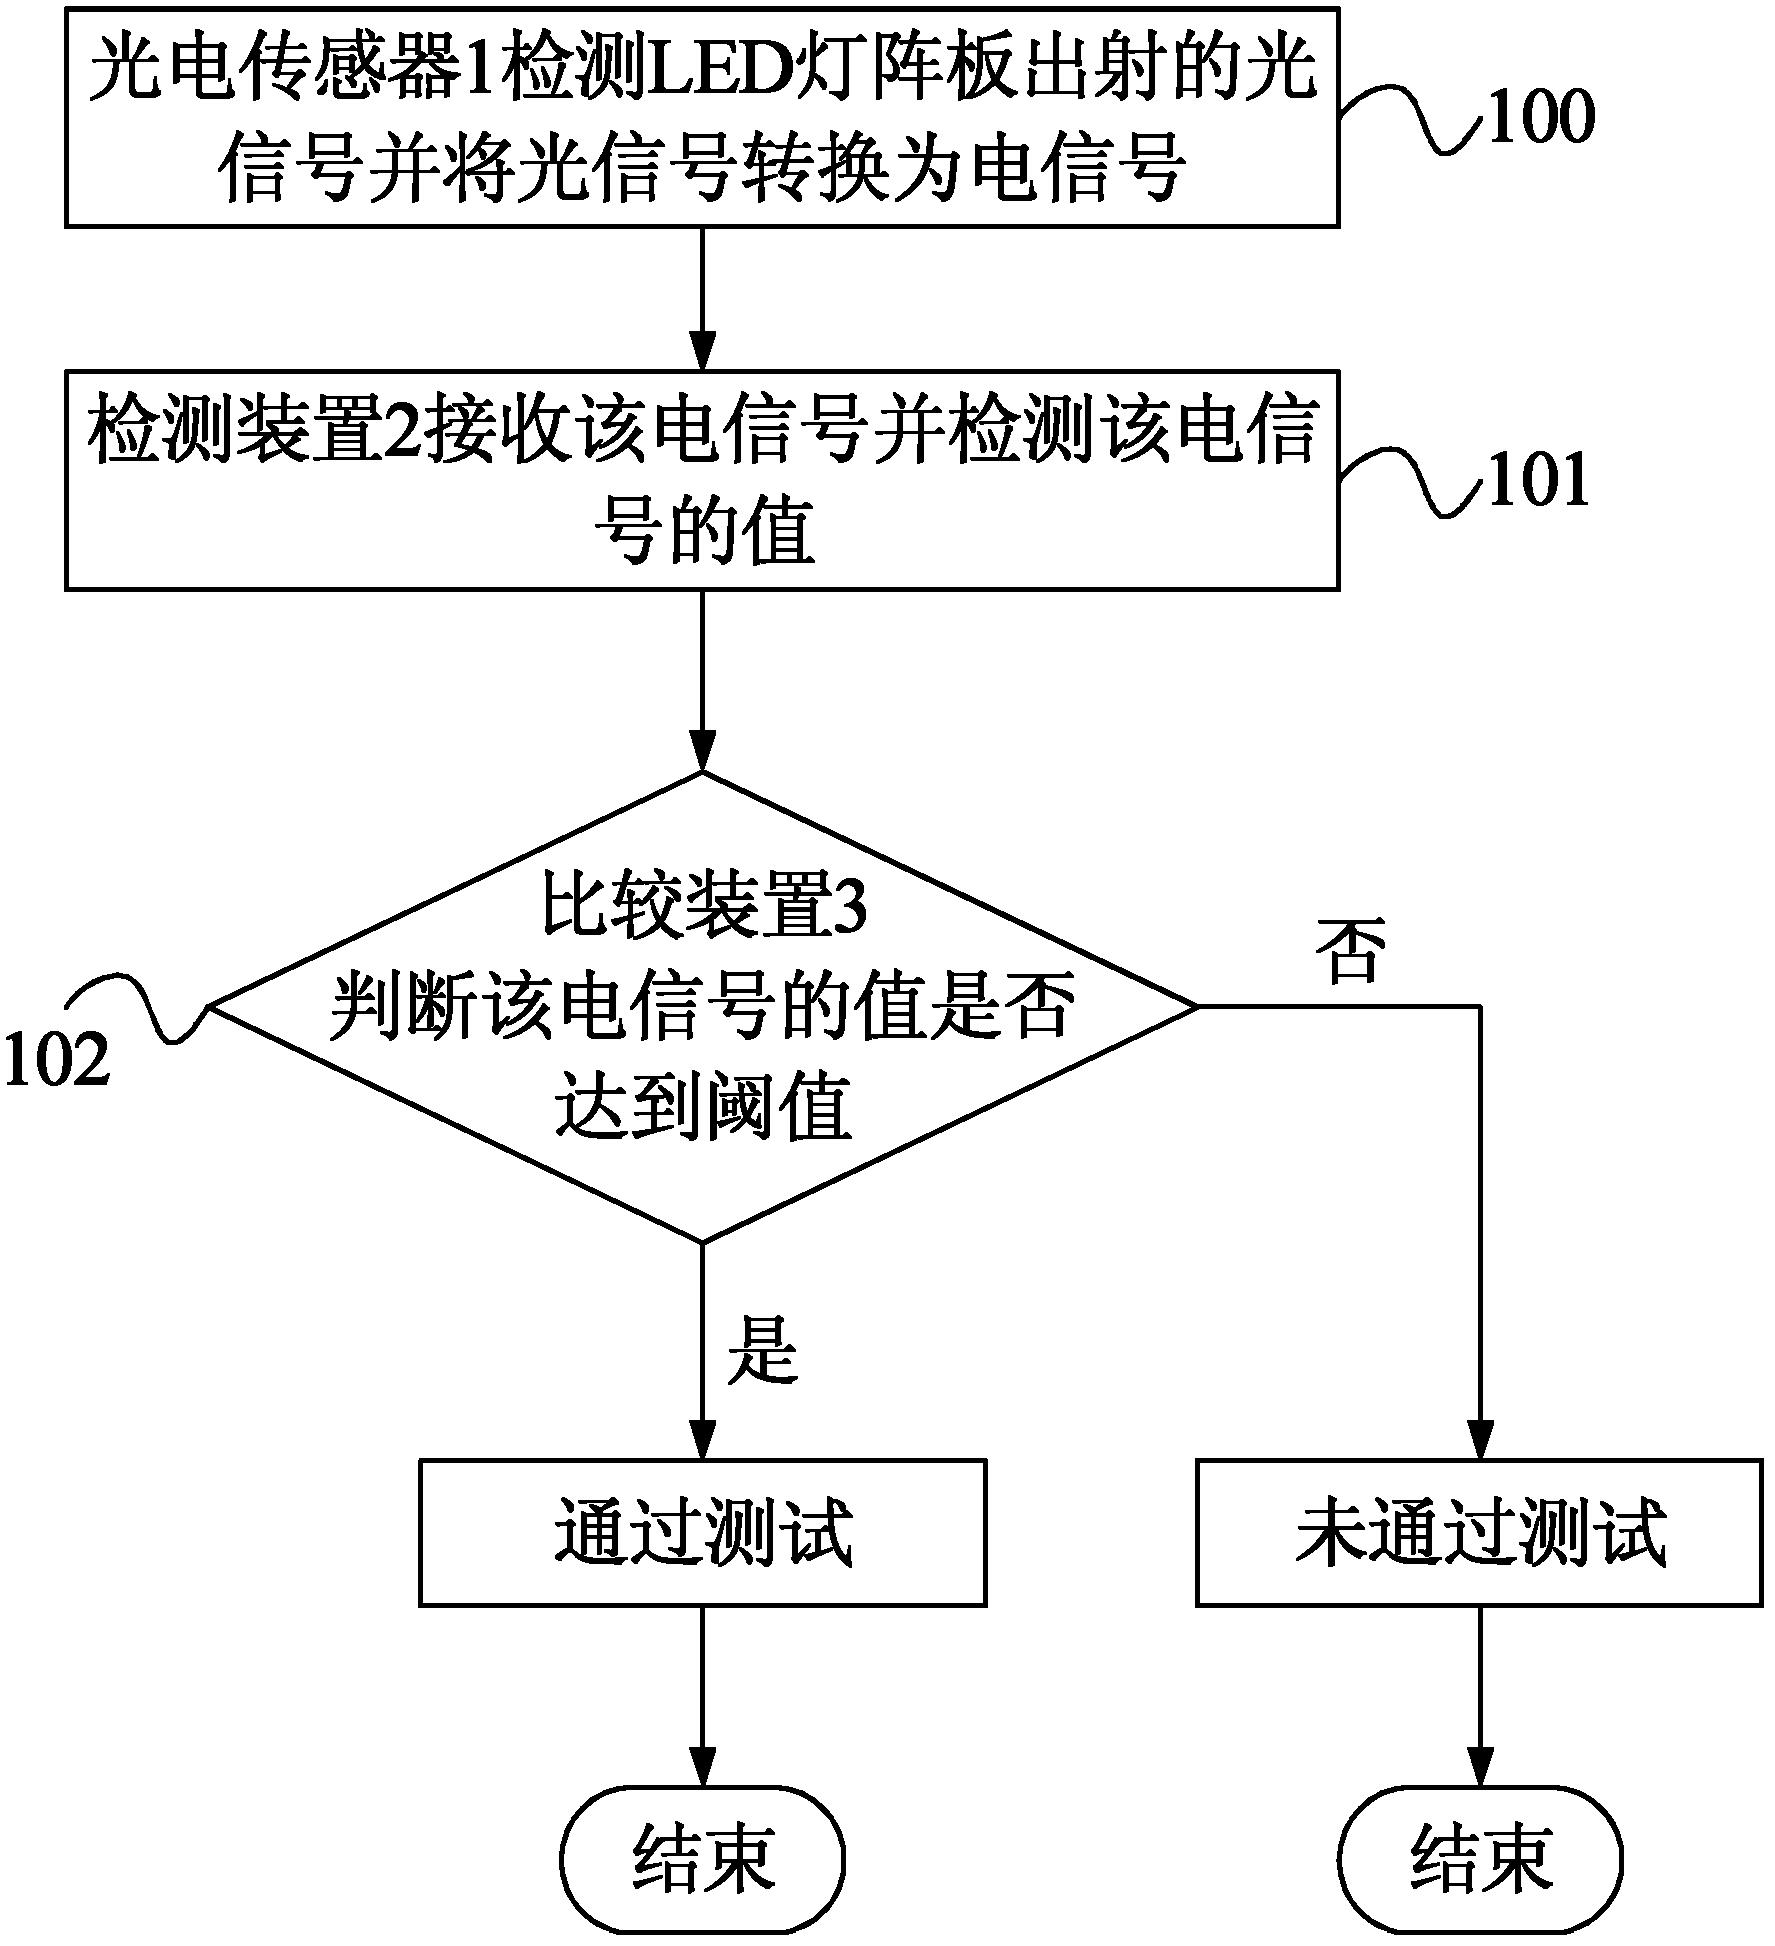 Lamp array board test device and test method